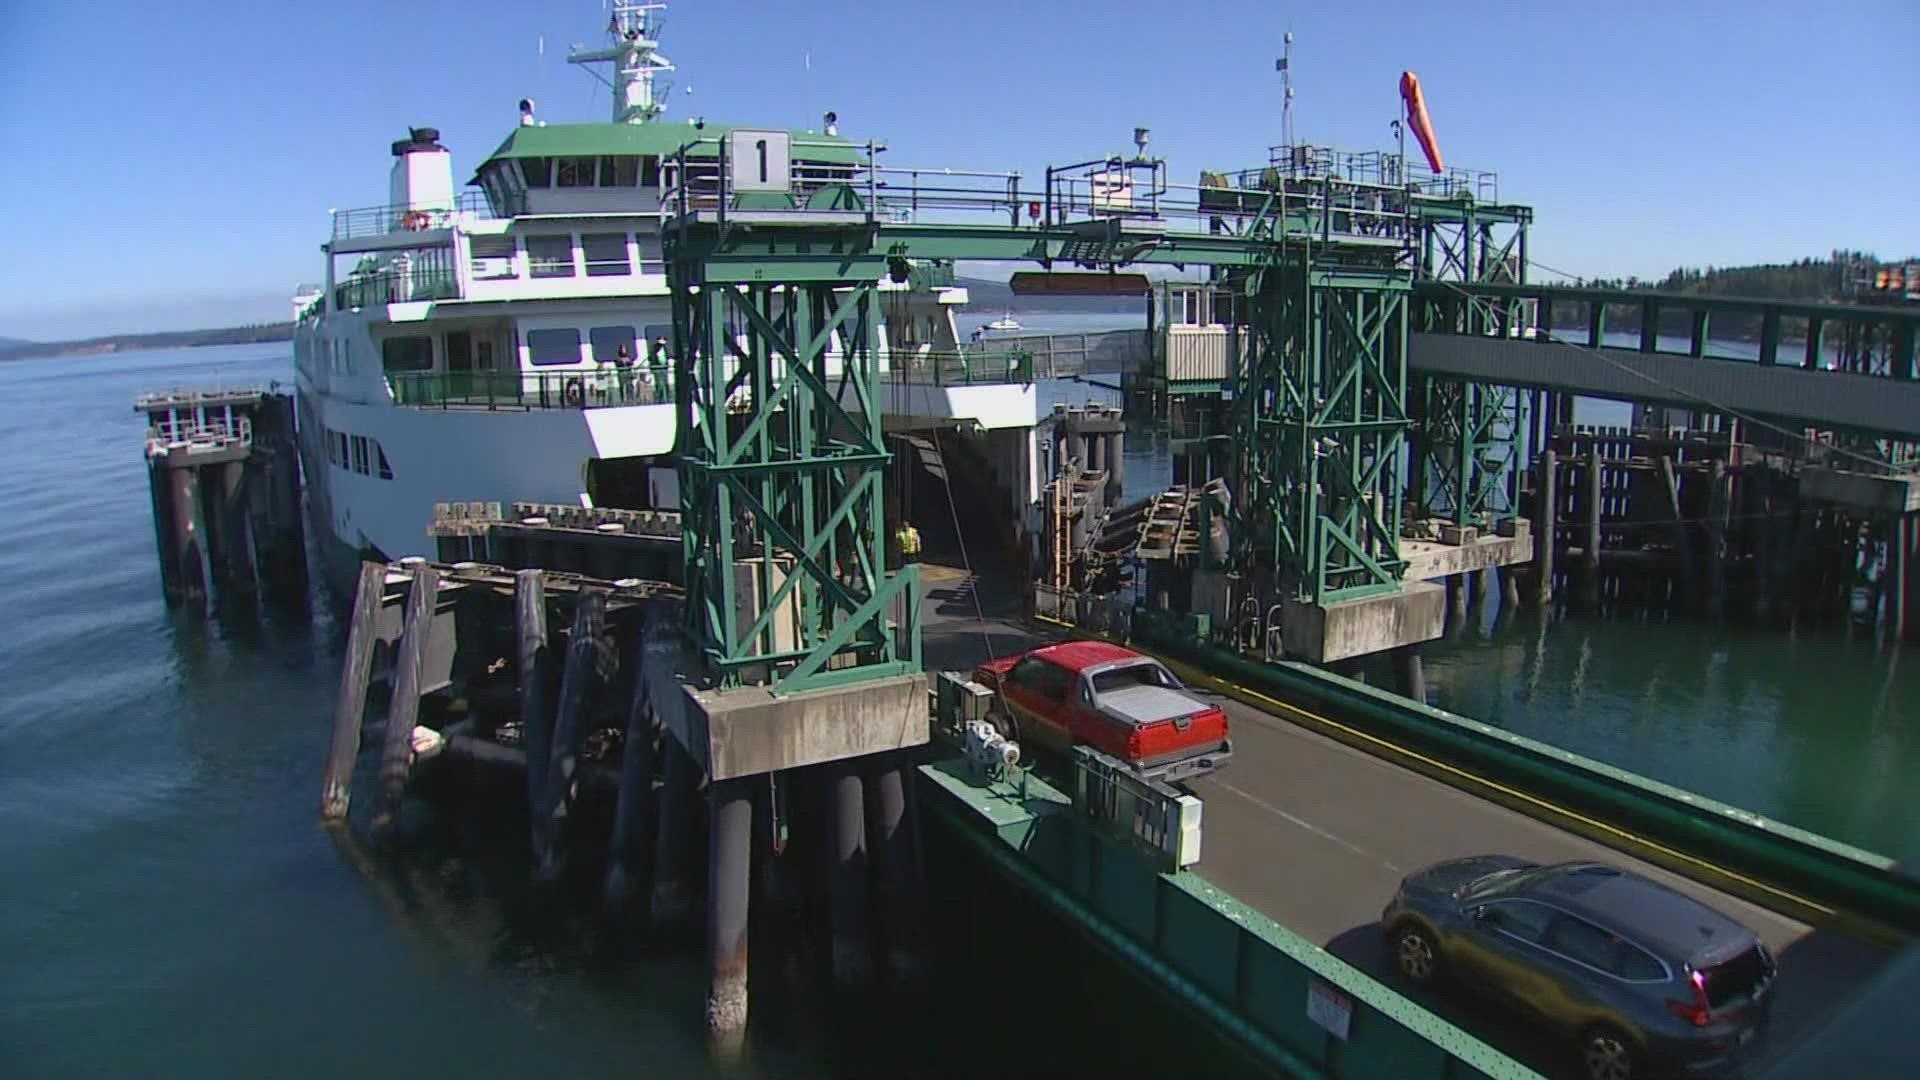 Washington State Ferries shut down Labor Day weekend reservations in response to the anticipated protest.